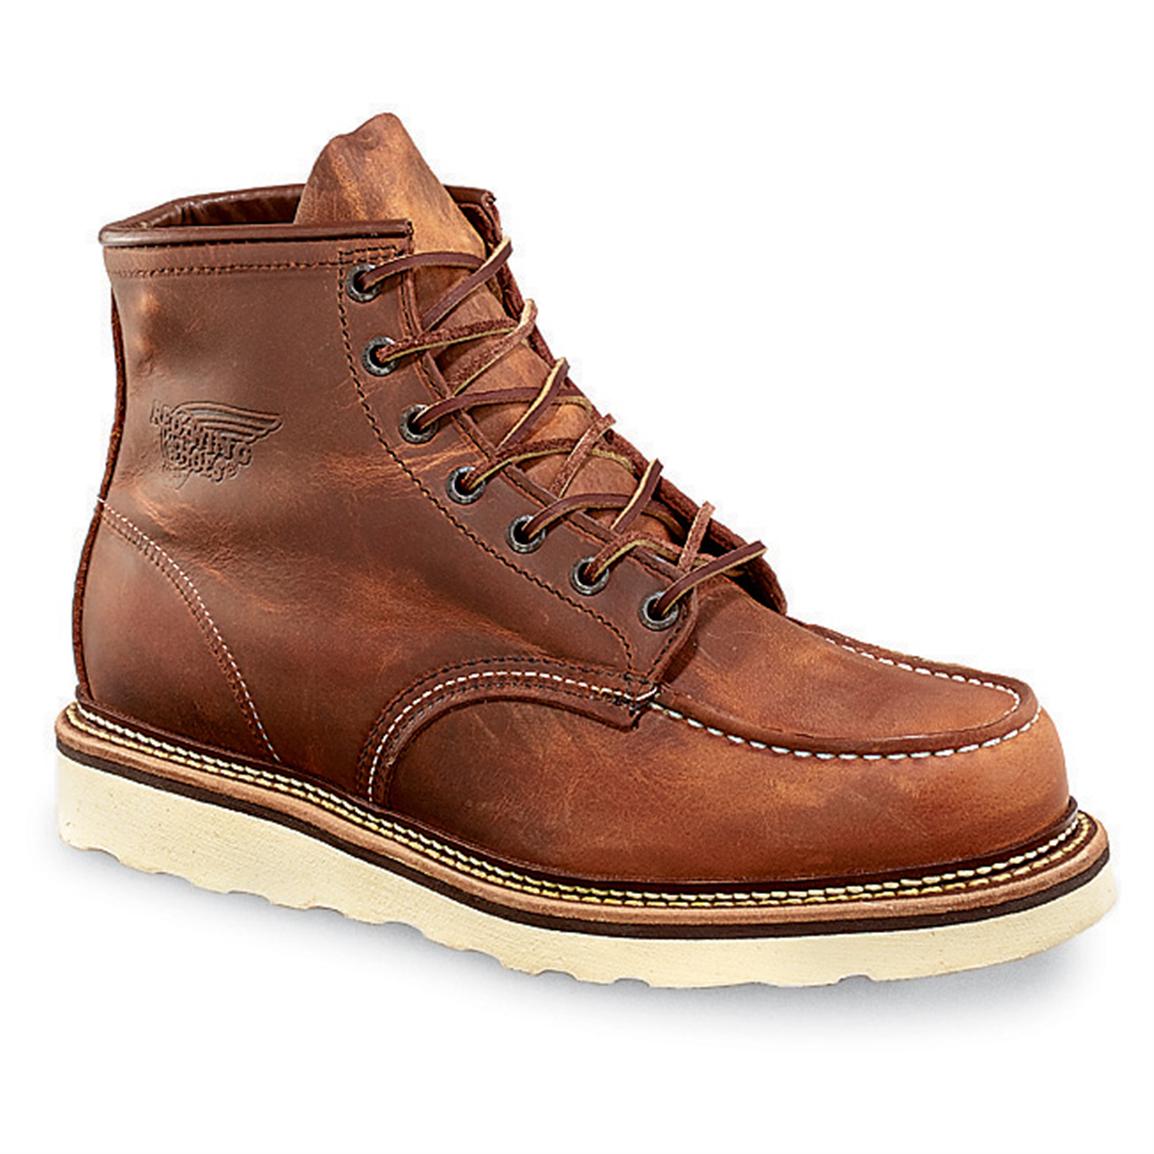 Men's Red WingÂ® Classic Lifestyle Boots - 148411, Work Boots at Sportsman's Guide